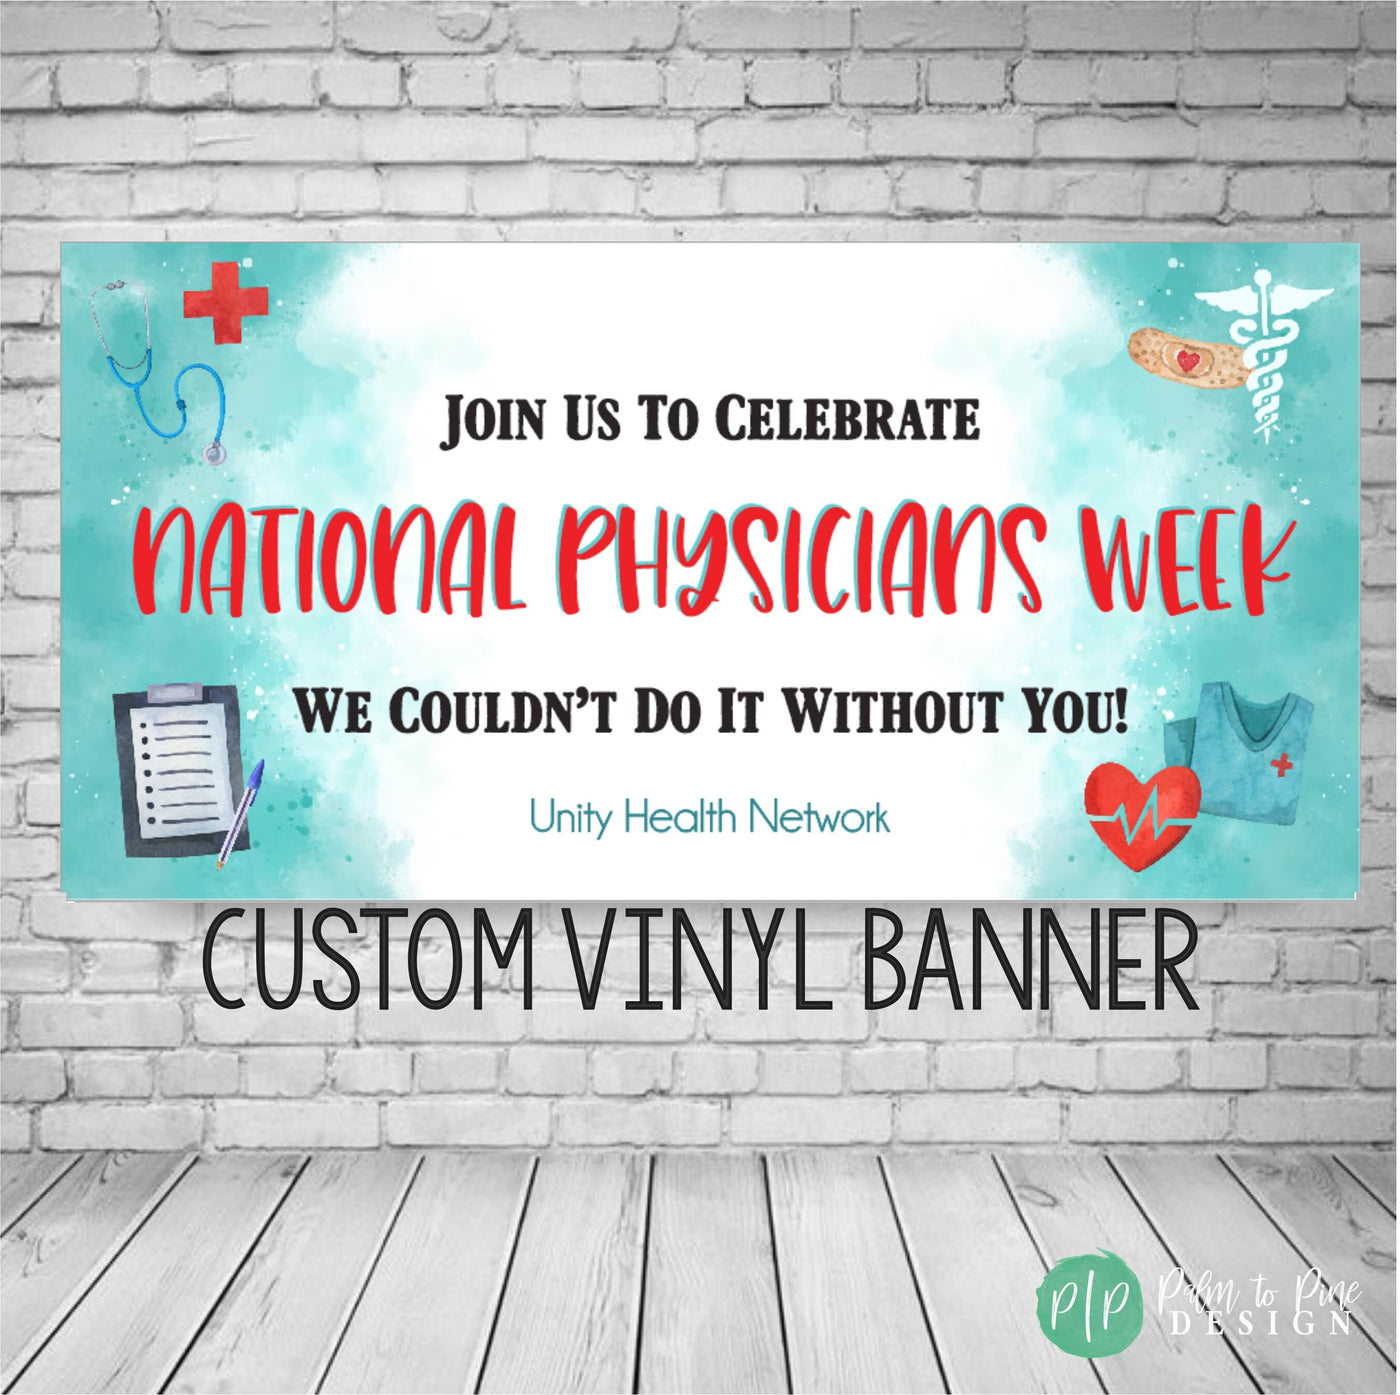 national physicians week personalized banner